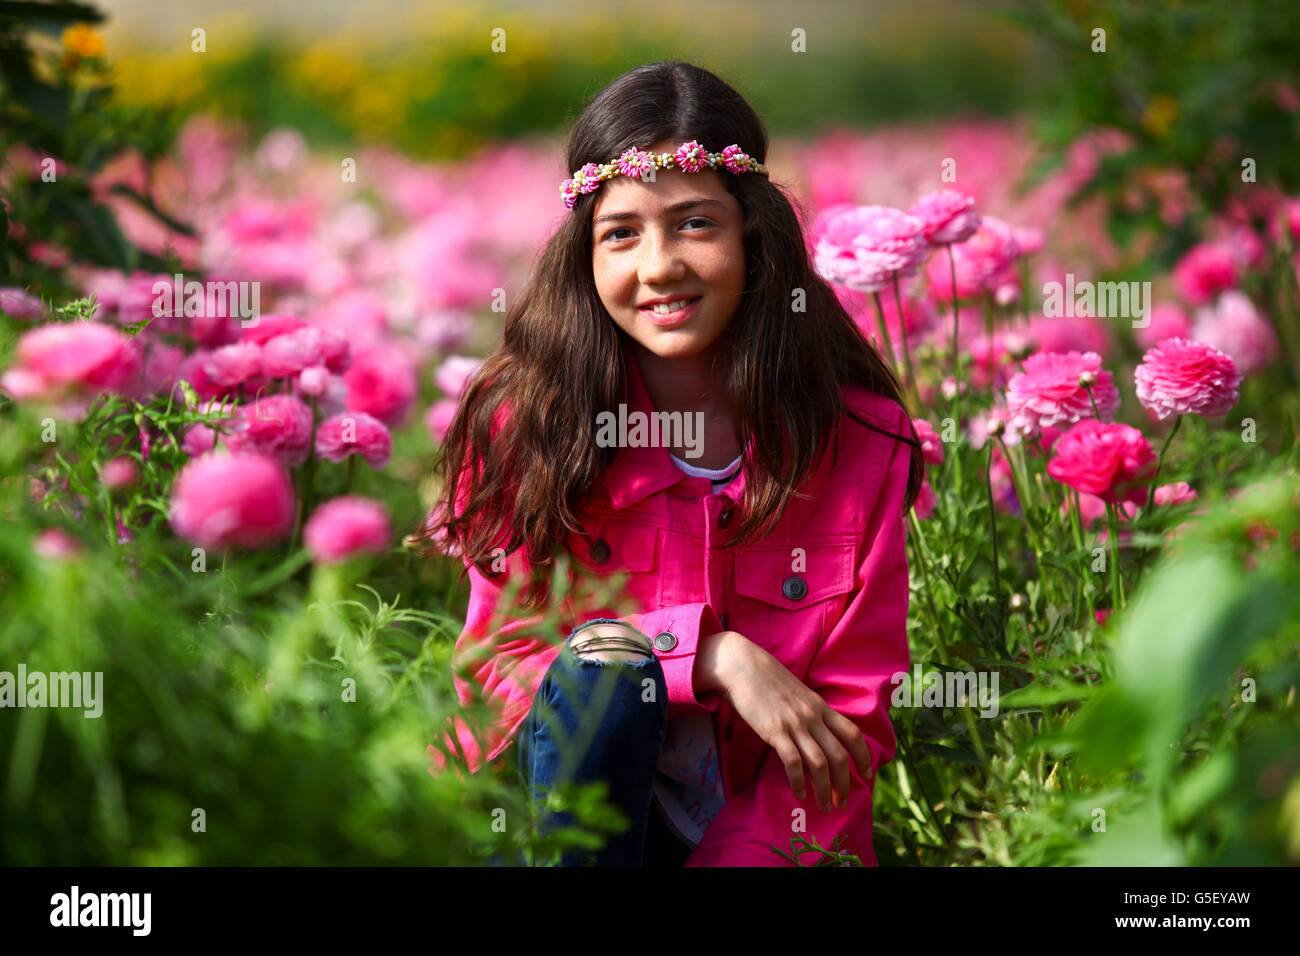 Young preteen girl of 12 in a hothouse of pink flowers Stock Photo